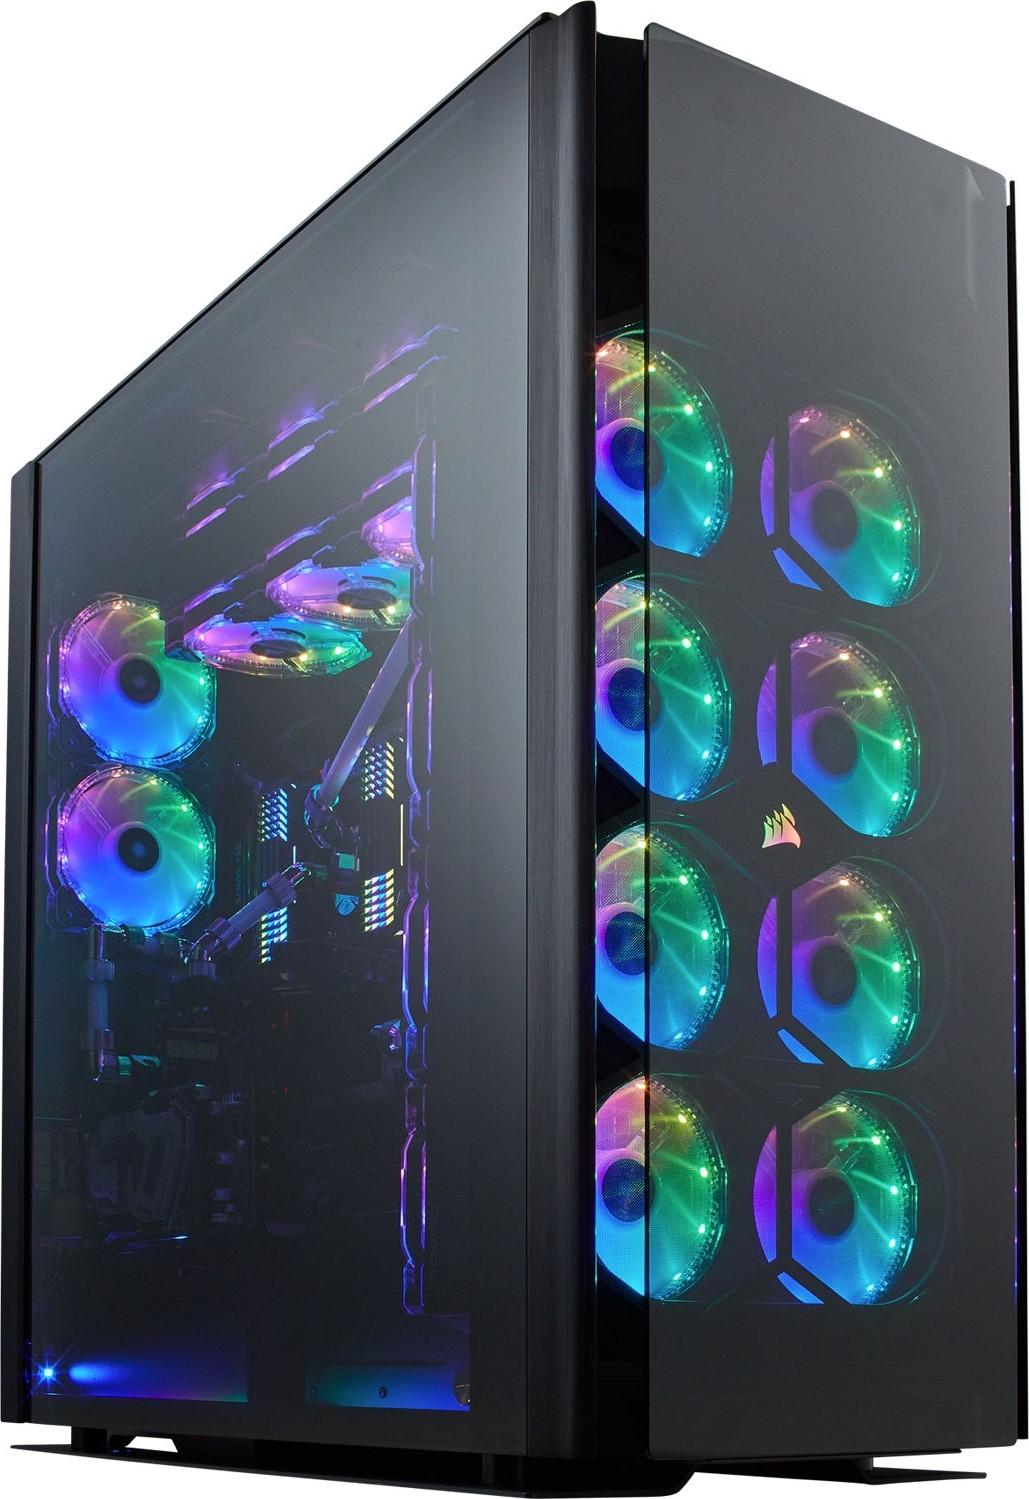 CORSAIR OBSIDIAN 1000D Super-Tower Case Smoked Tempered Glass Aluminum Trim - Integrated COMMANDER PRO Fan And Lighting Controller | CC-9011148-WW